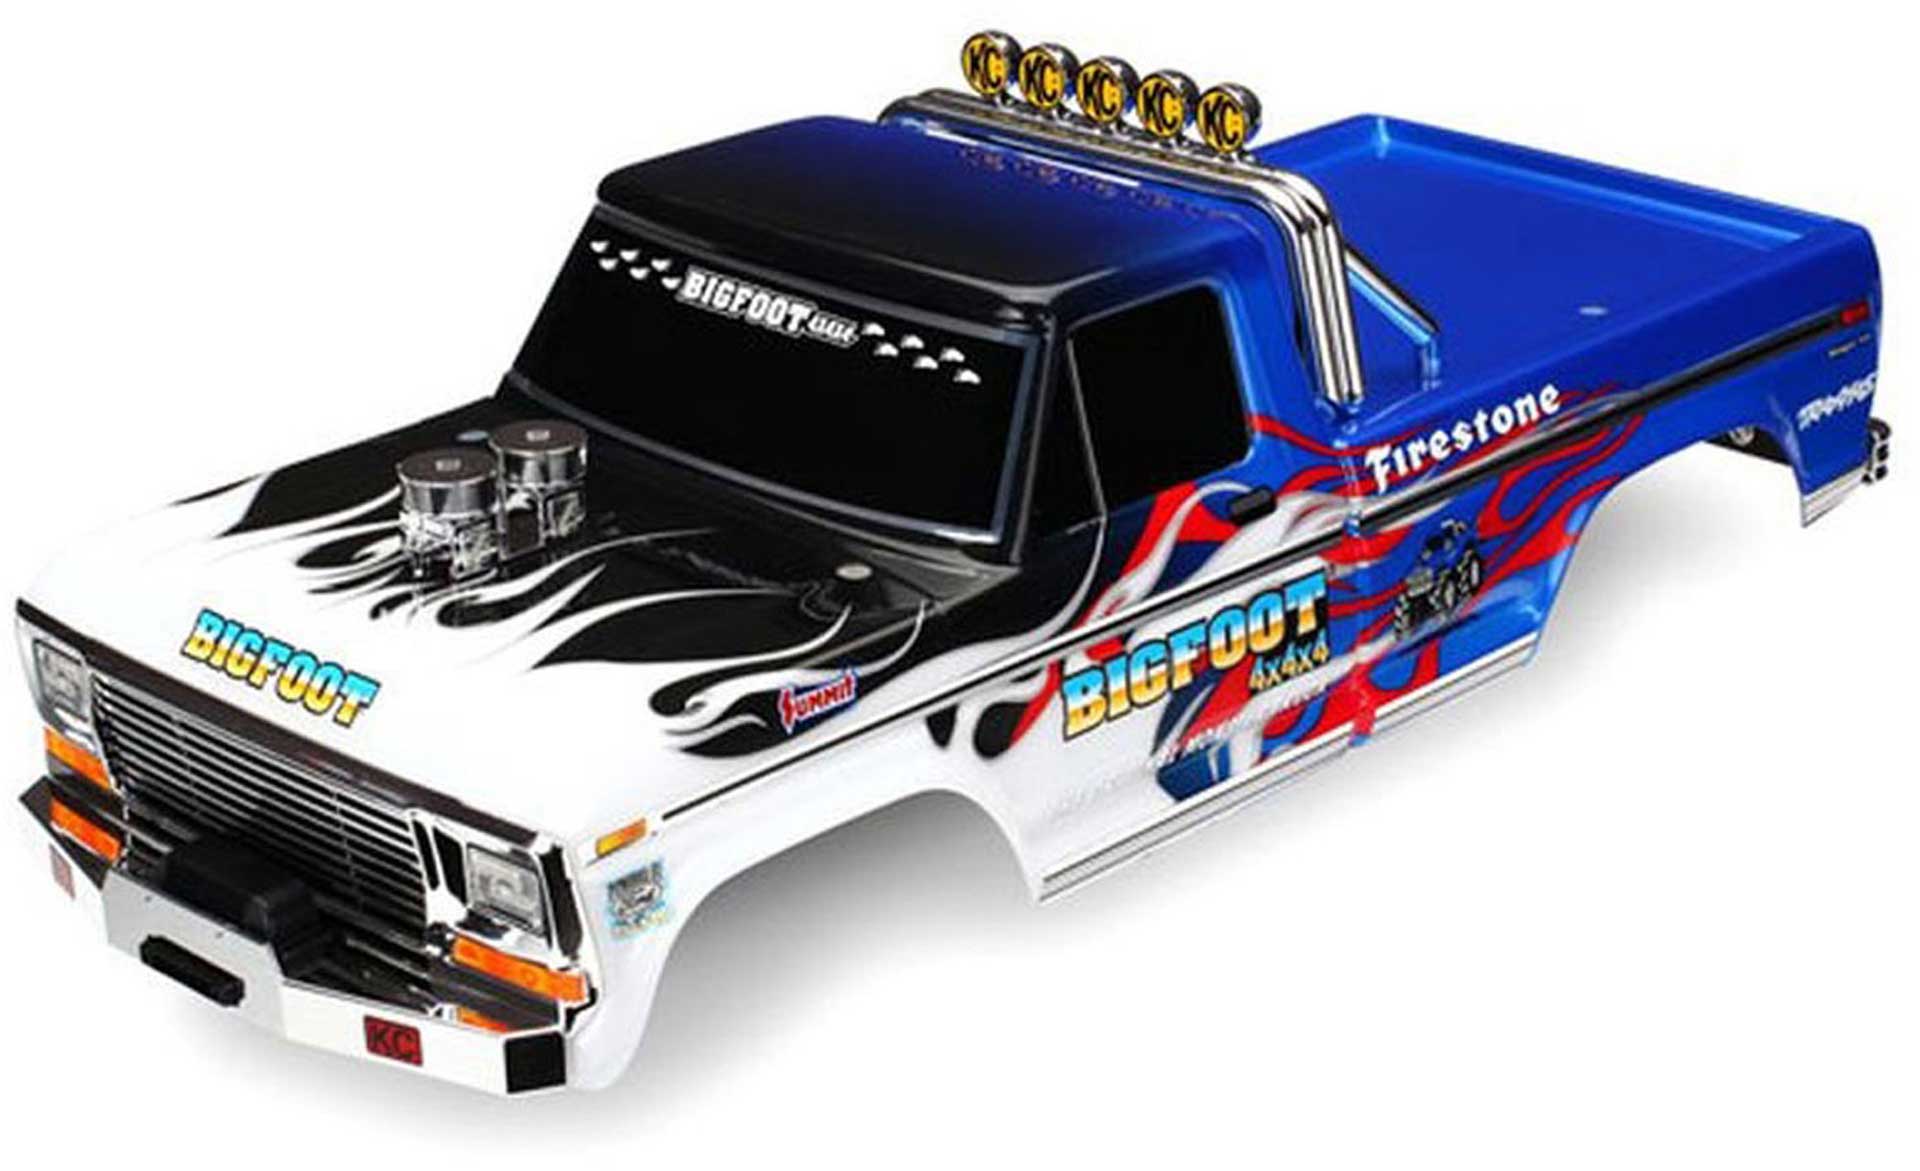 TRAXXAS CHECK BIGFOOT FLAME OFFICIALLY LICENSED